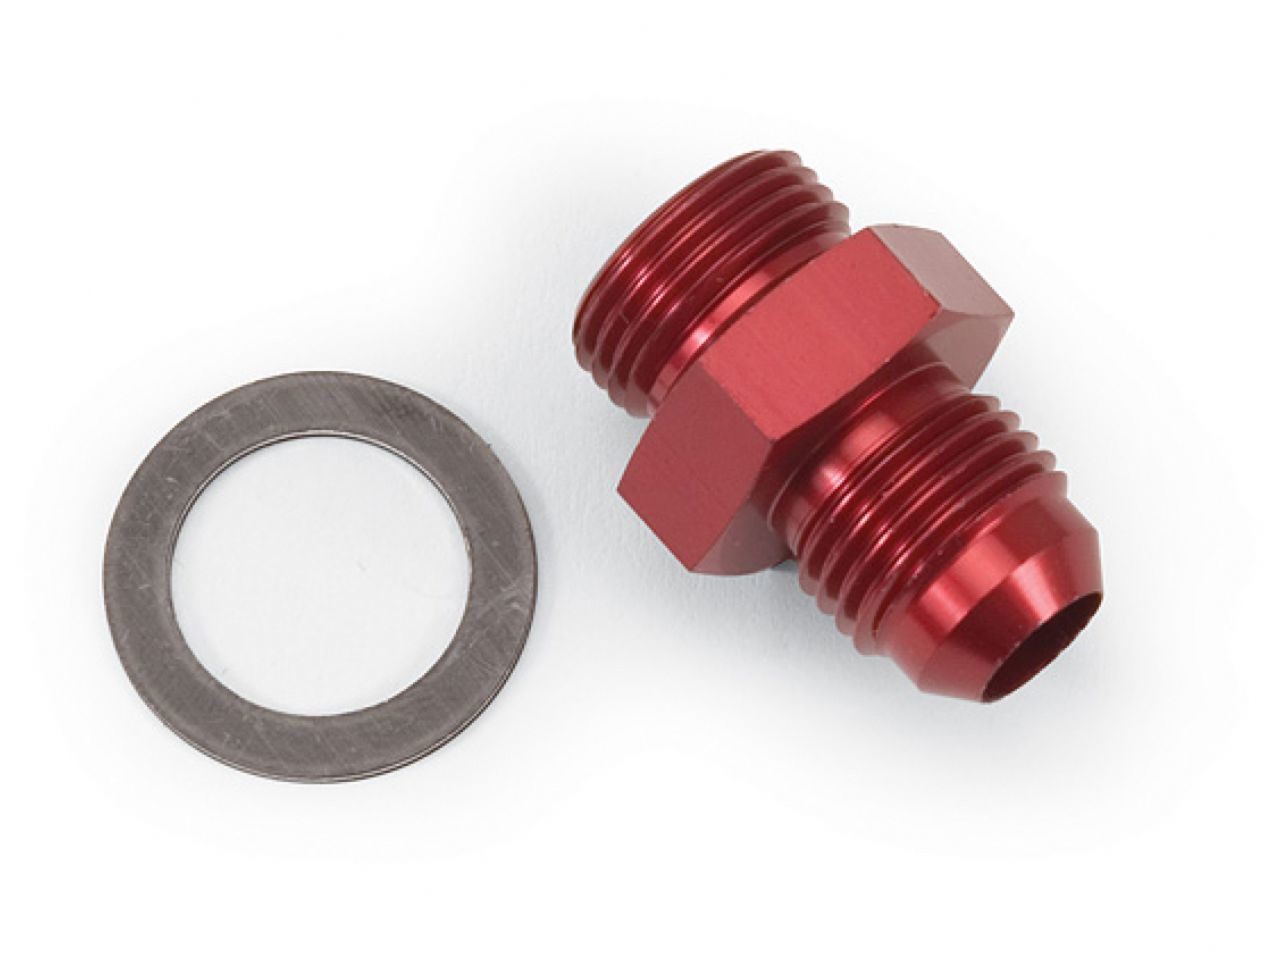 Edelbrock Fuel Fittings and Adapters 8087 Item Image